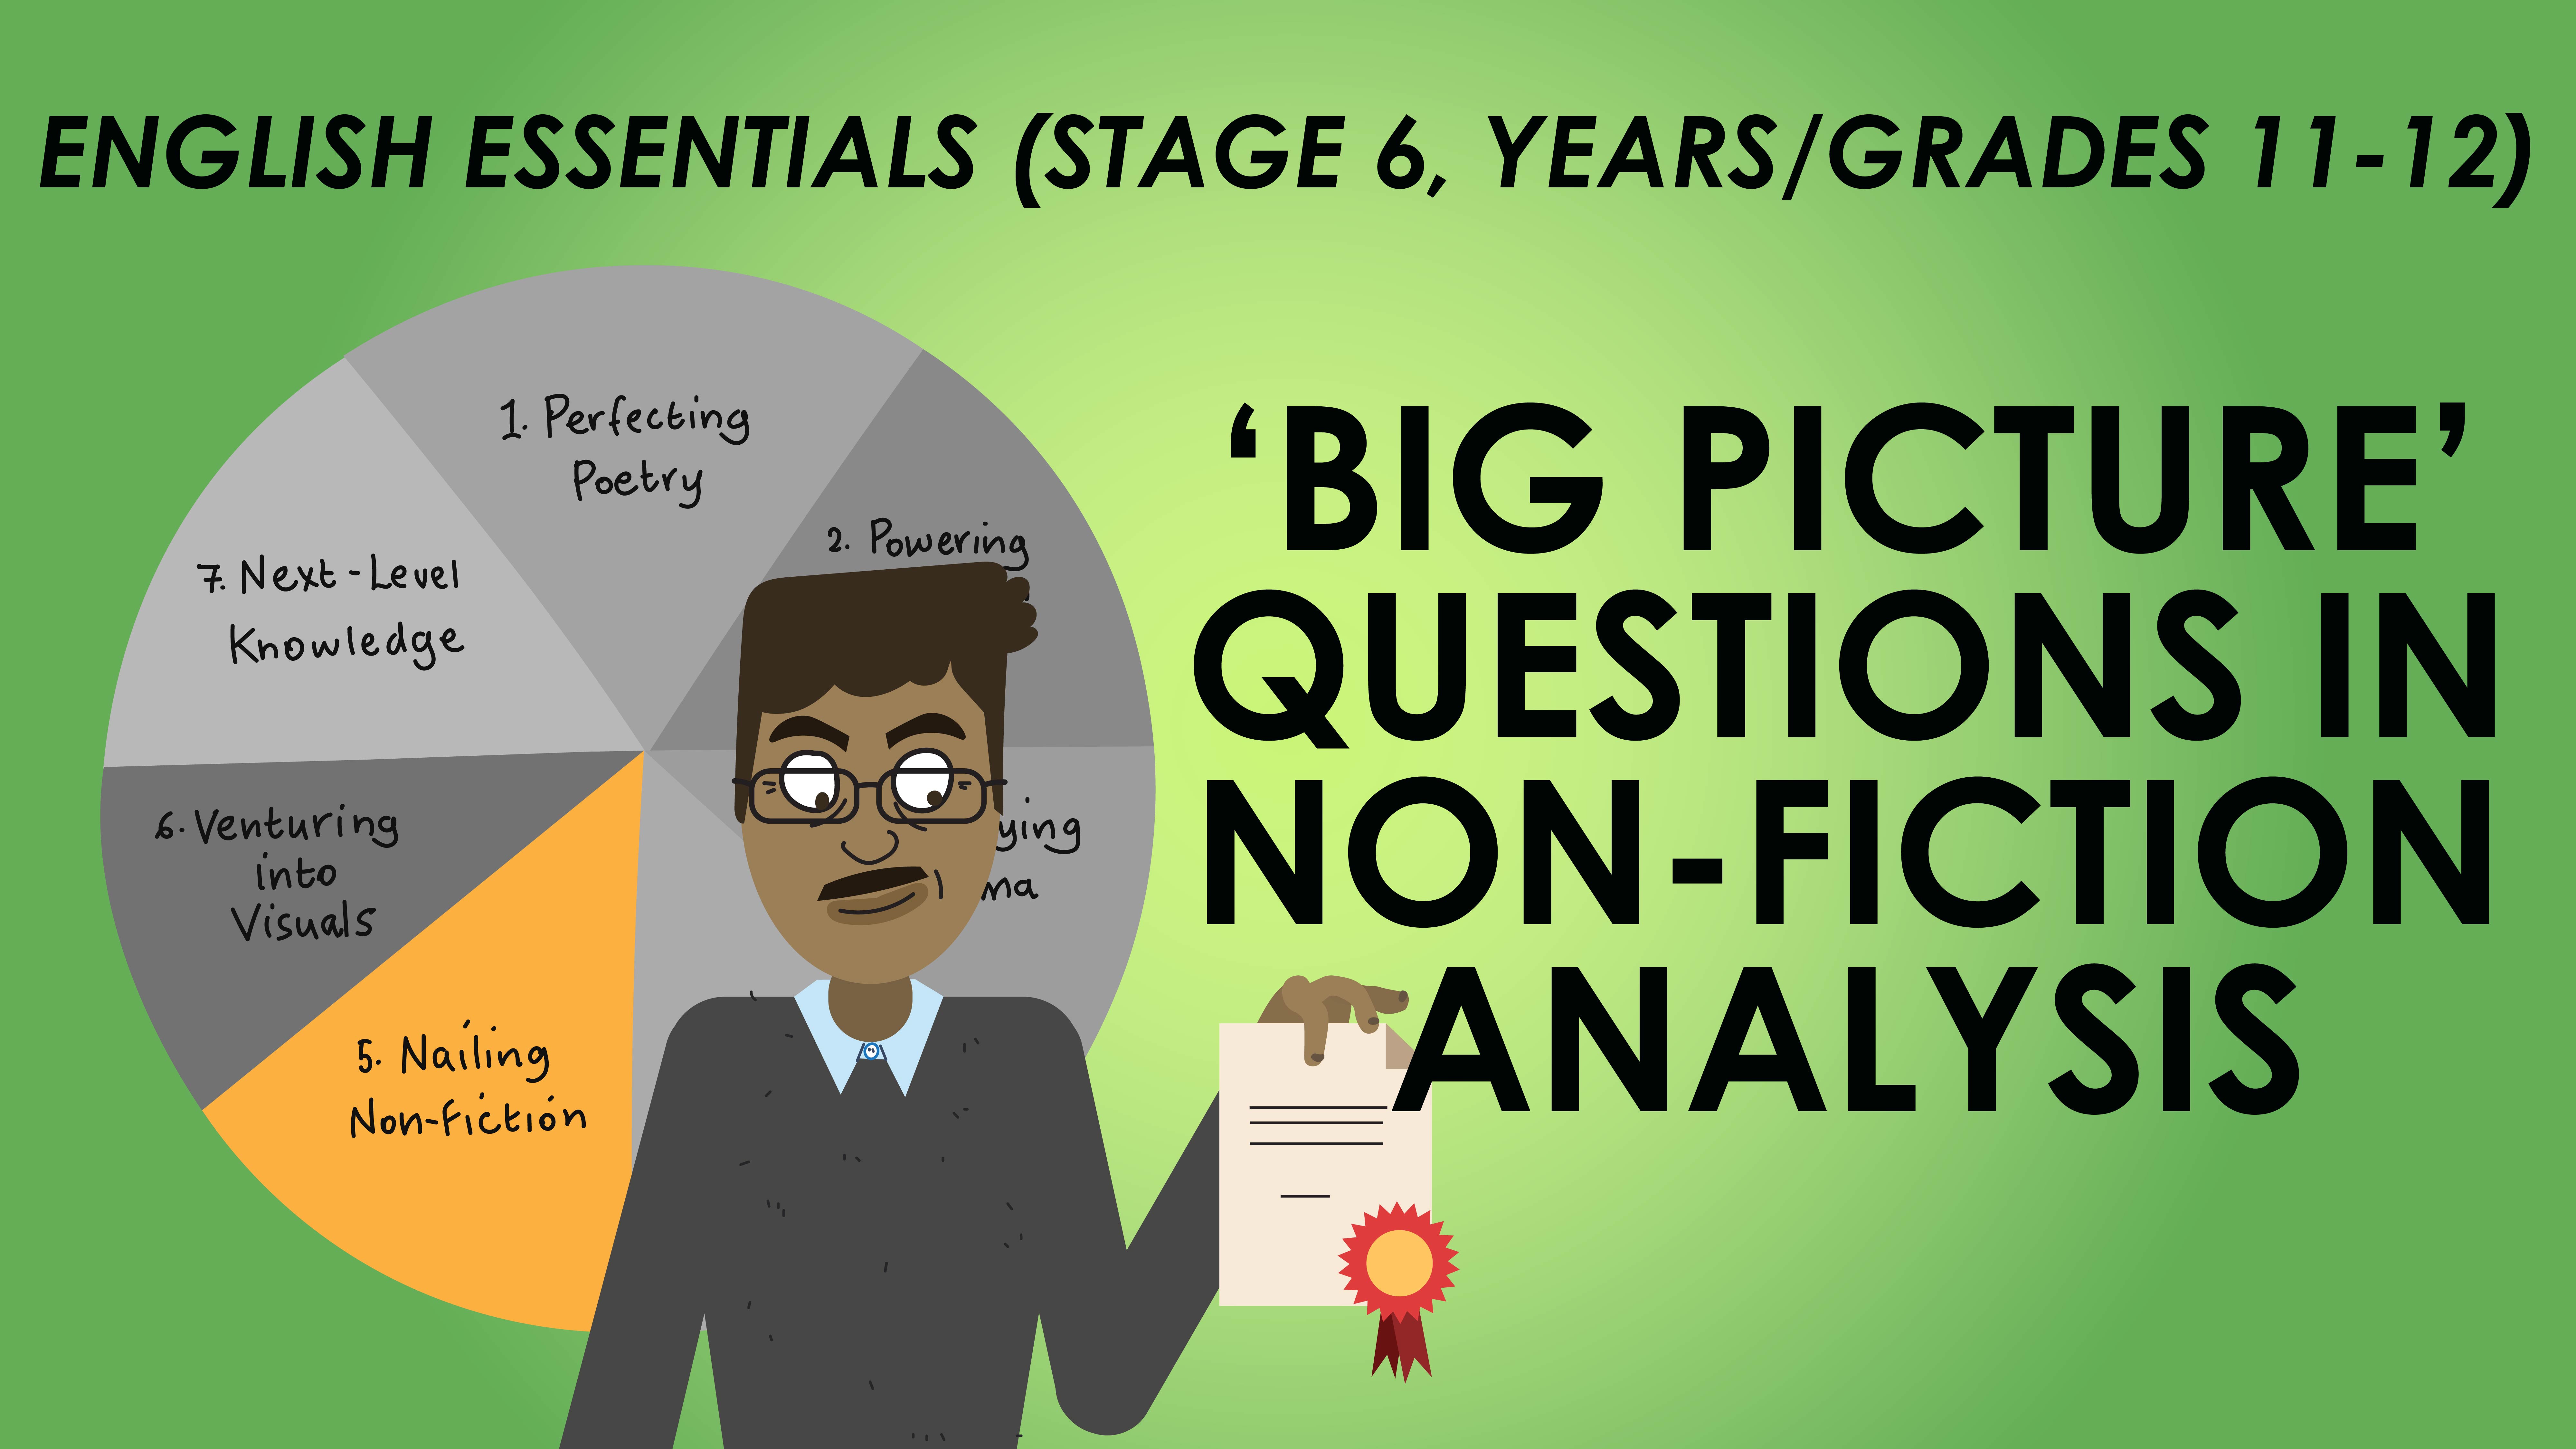 English Essentials - Nailing Non-Fiction – 'Big Picture' Questions in Non-fiction Analysis (Stage 6, Years/Grades 11-12)